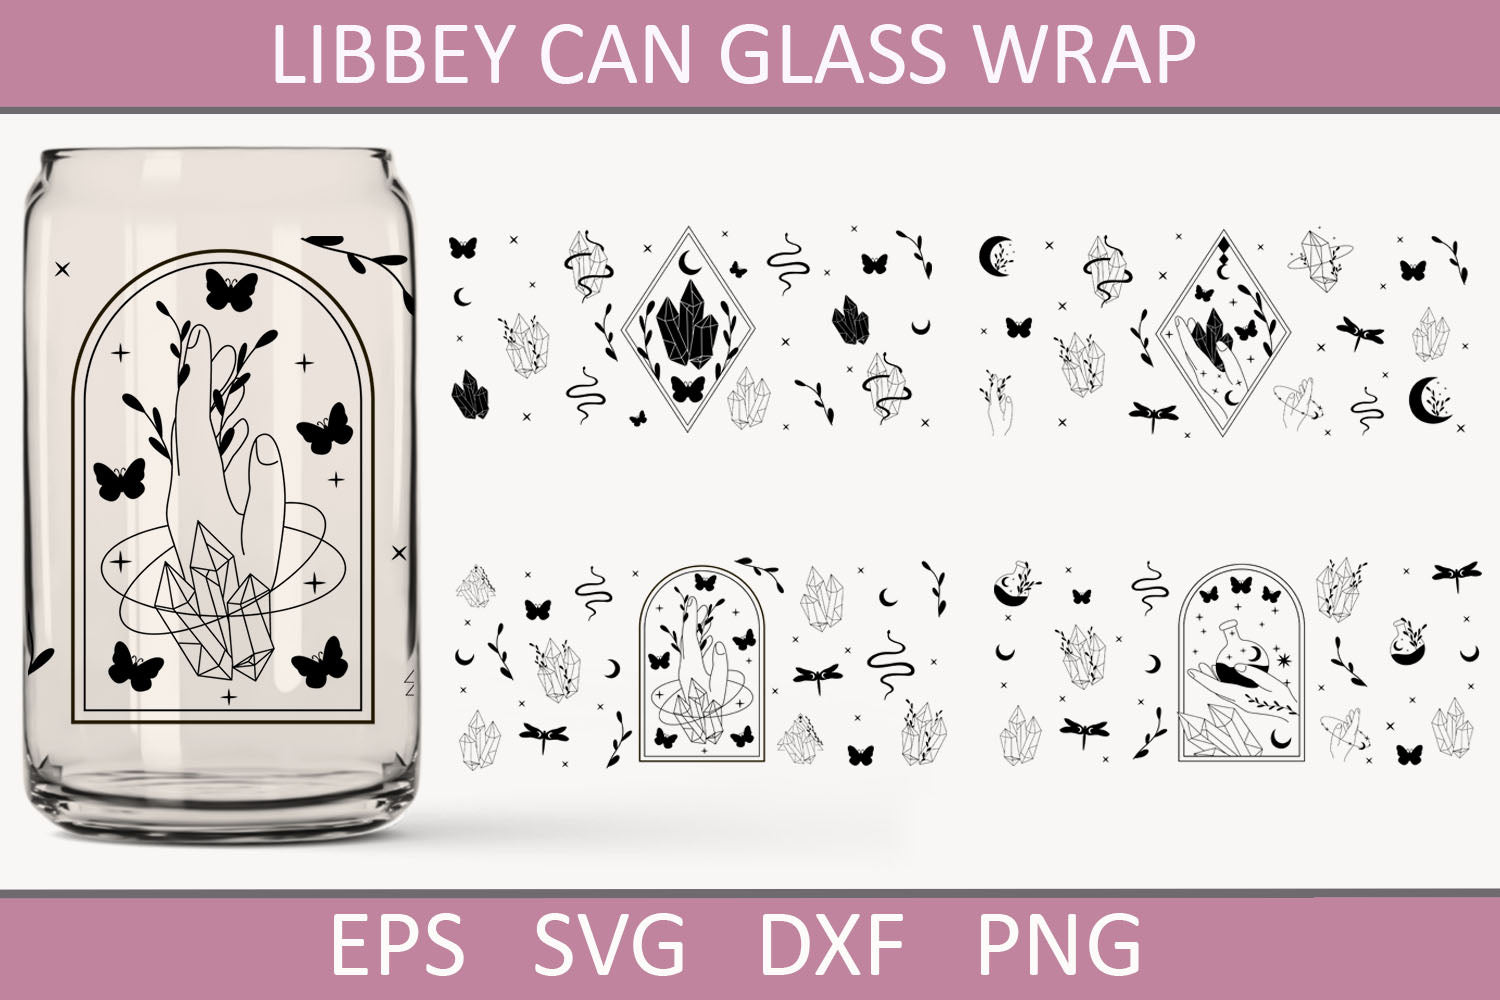 Magical 16oz libbey glass wrap, Celestial beer can glass svg - So